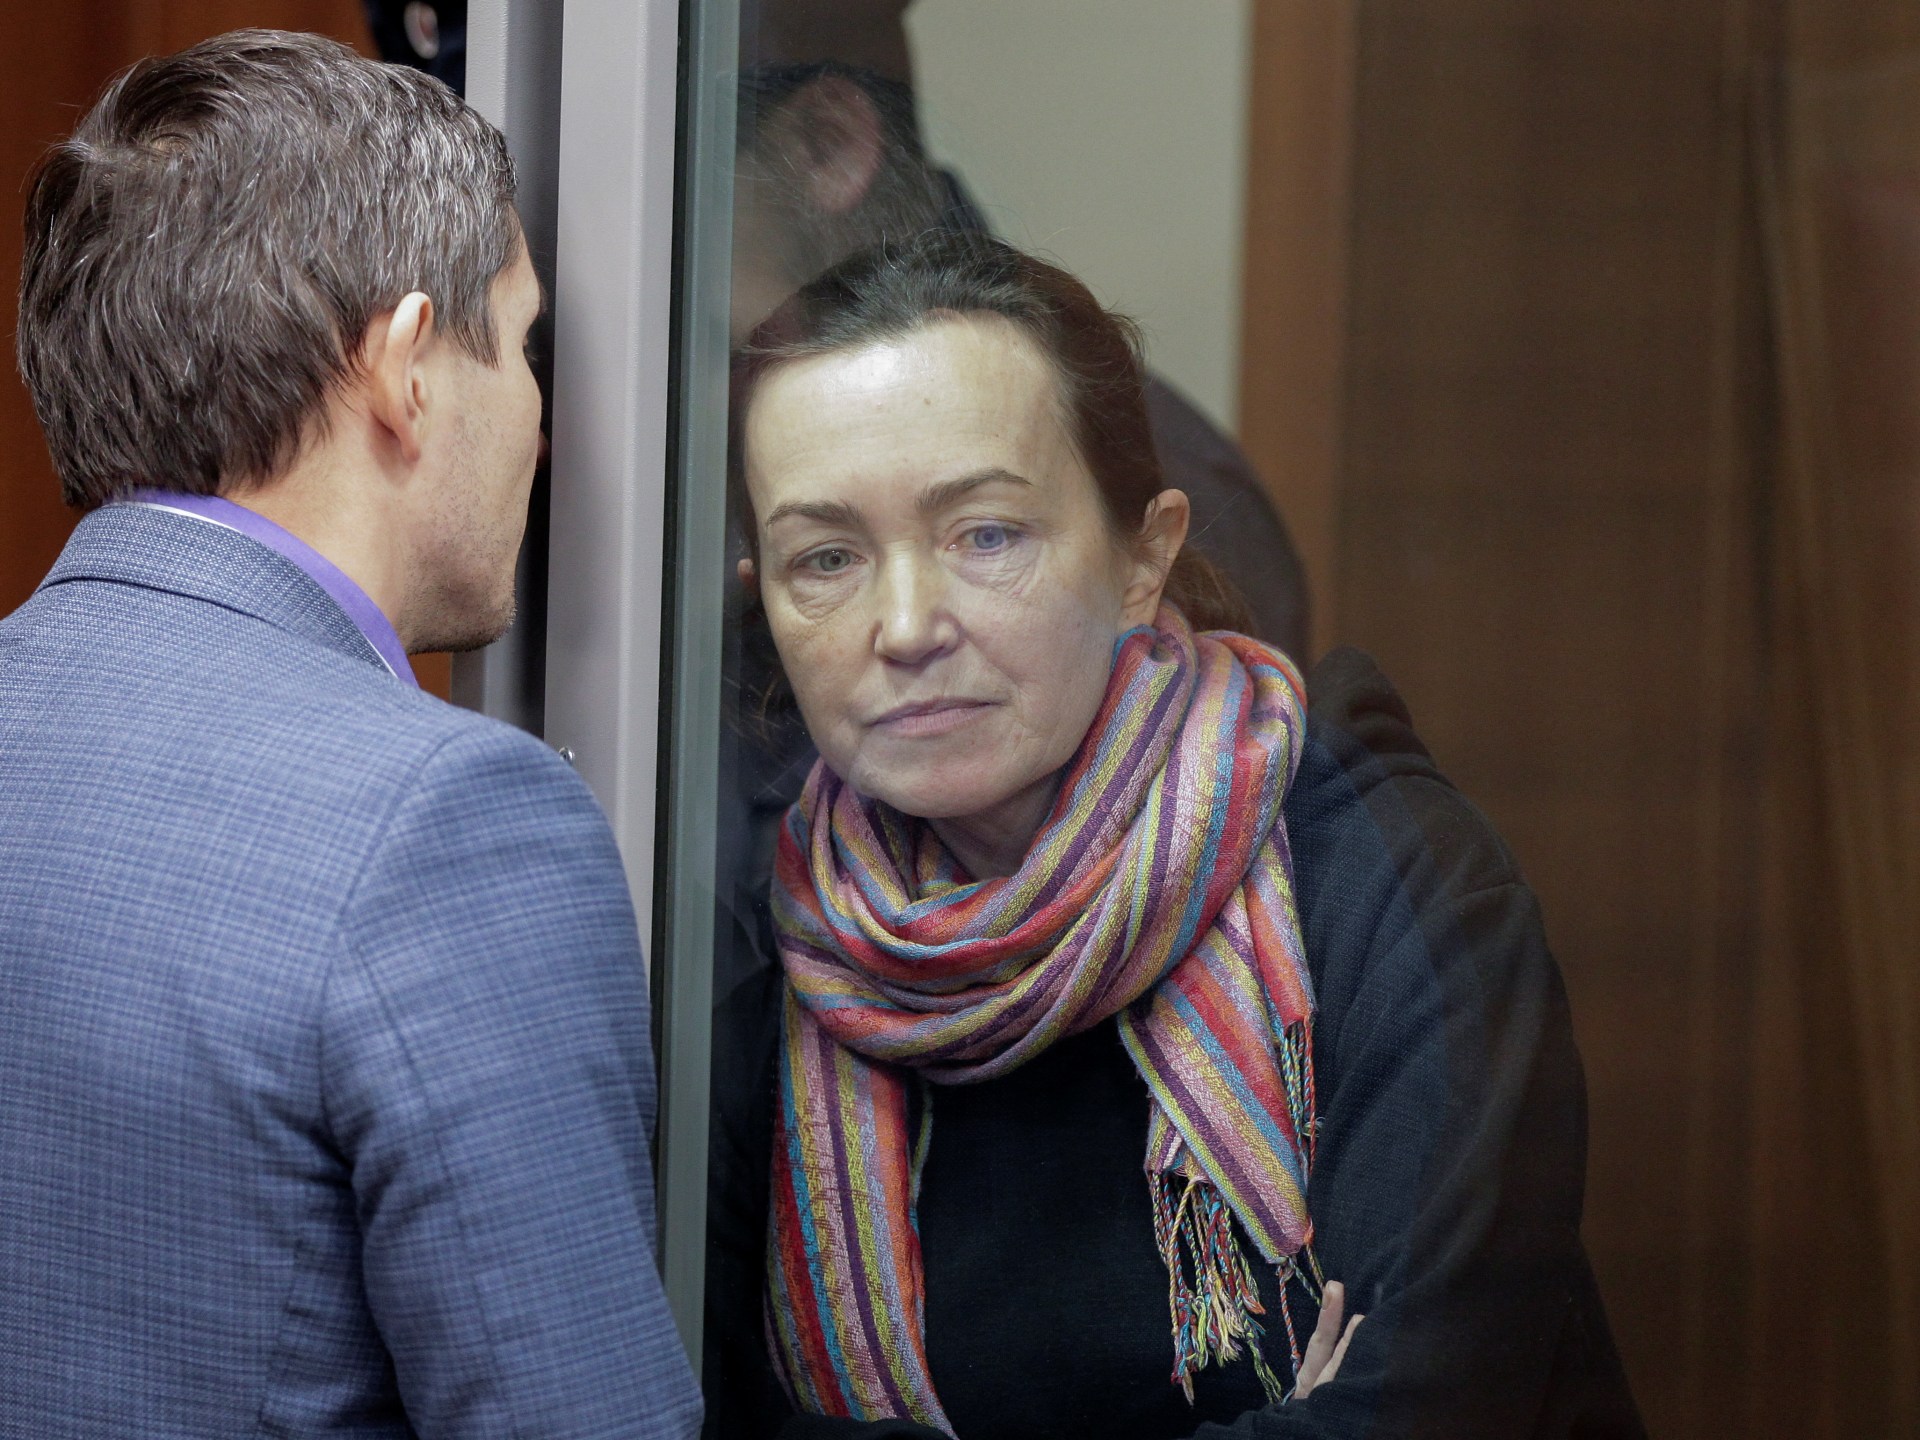 Russian court extends detention of US journalist Kurmasheva until February | Freedom of the Press News #Russian #court #extends #detention #journalist #Kurmasheva #February #Freedom #Press #News